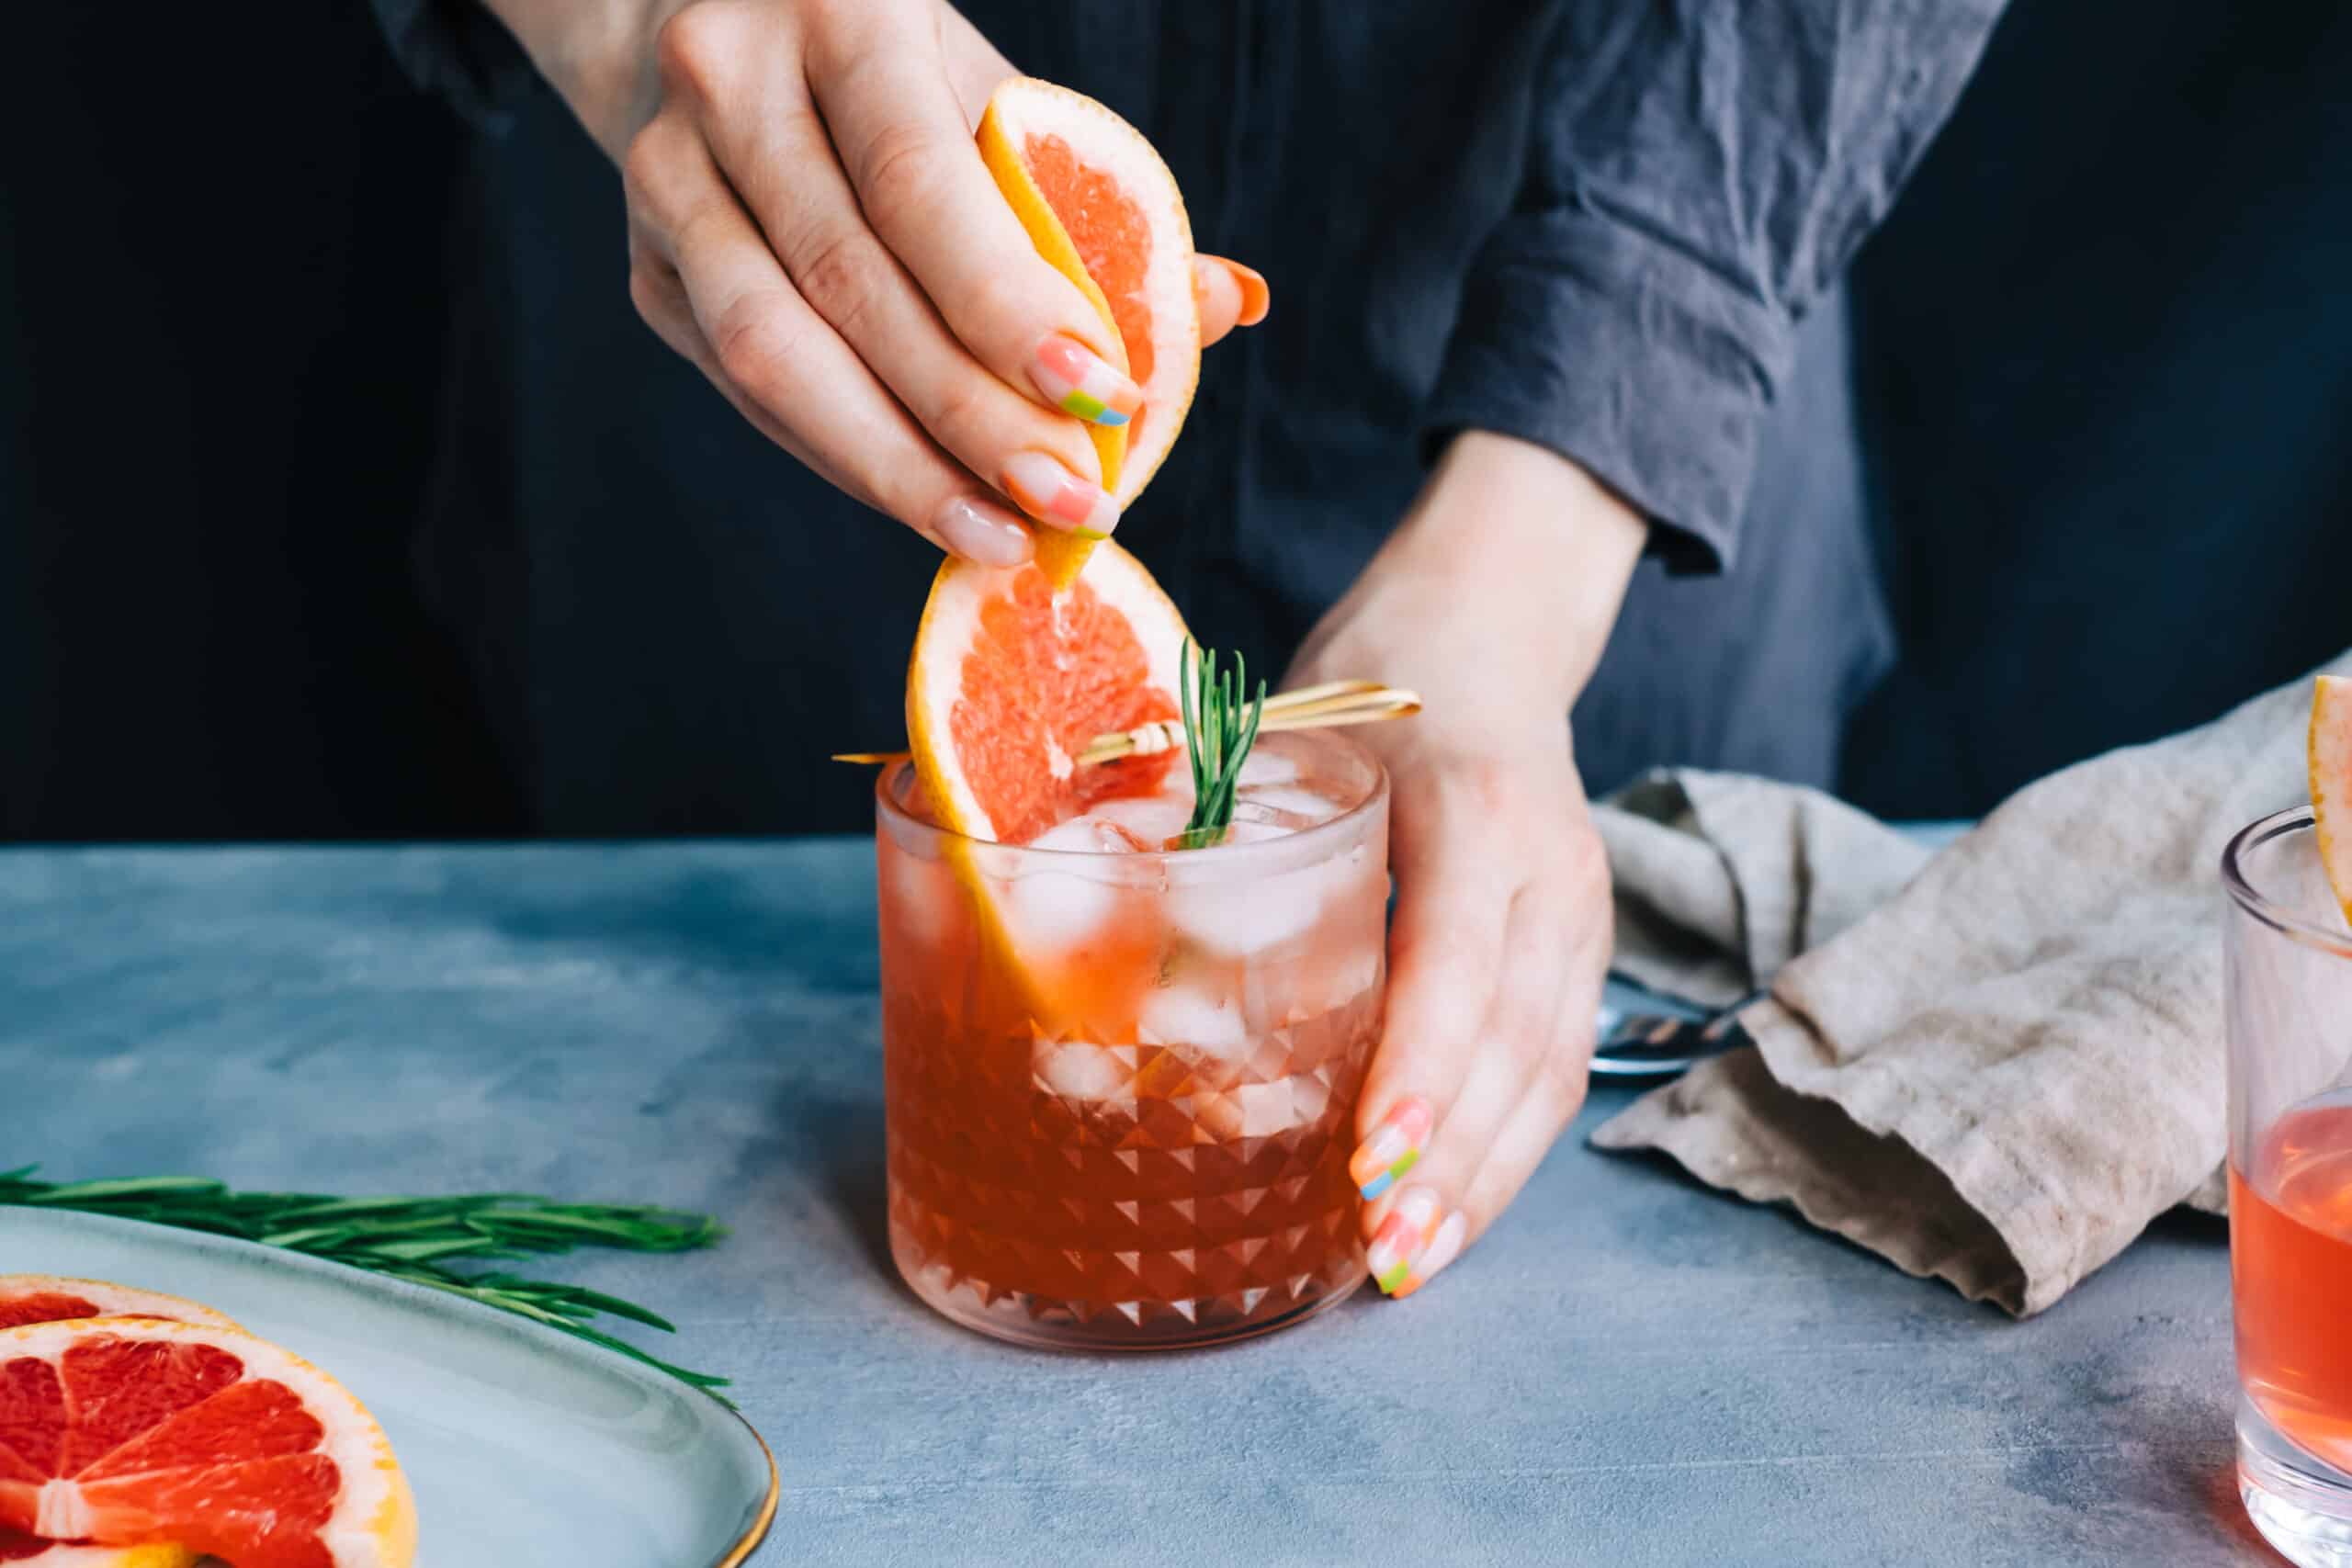 Female bartender hand squeezes juice from fresh grapefruit in cocktail lemonade with ice and rosemary. Grapefruit is also used a kratom potentiator.